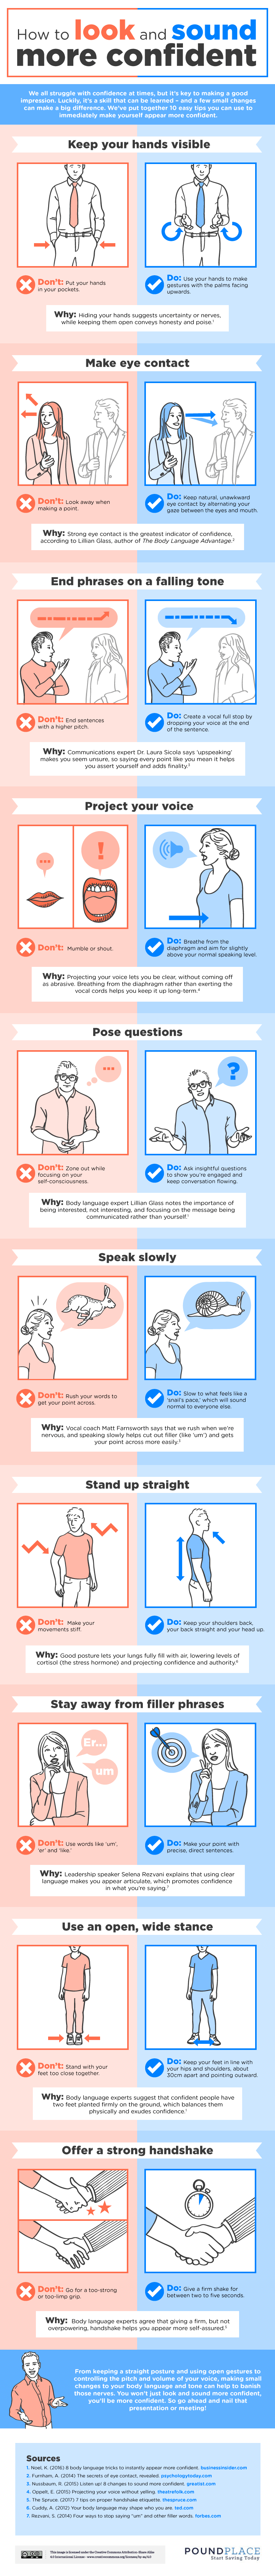 How To Look And Sound More Confident Infographic